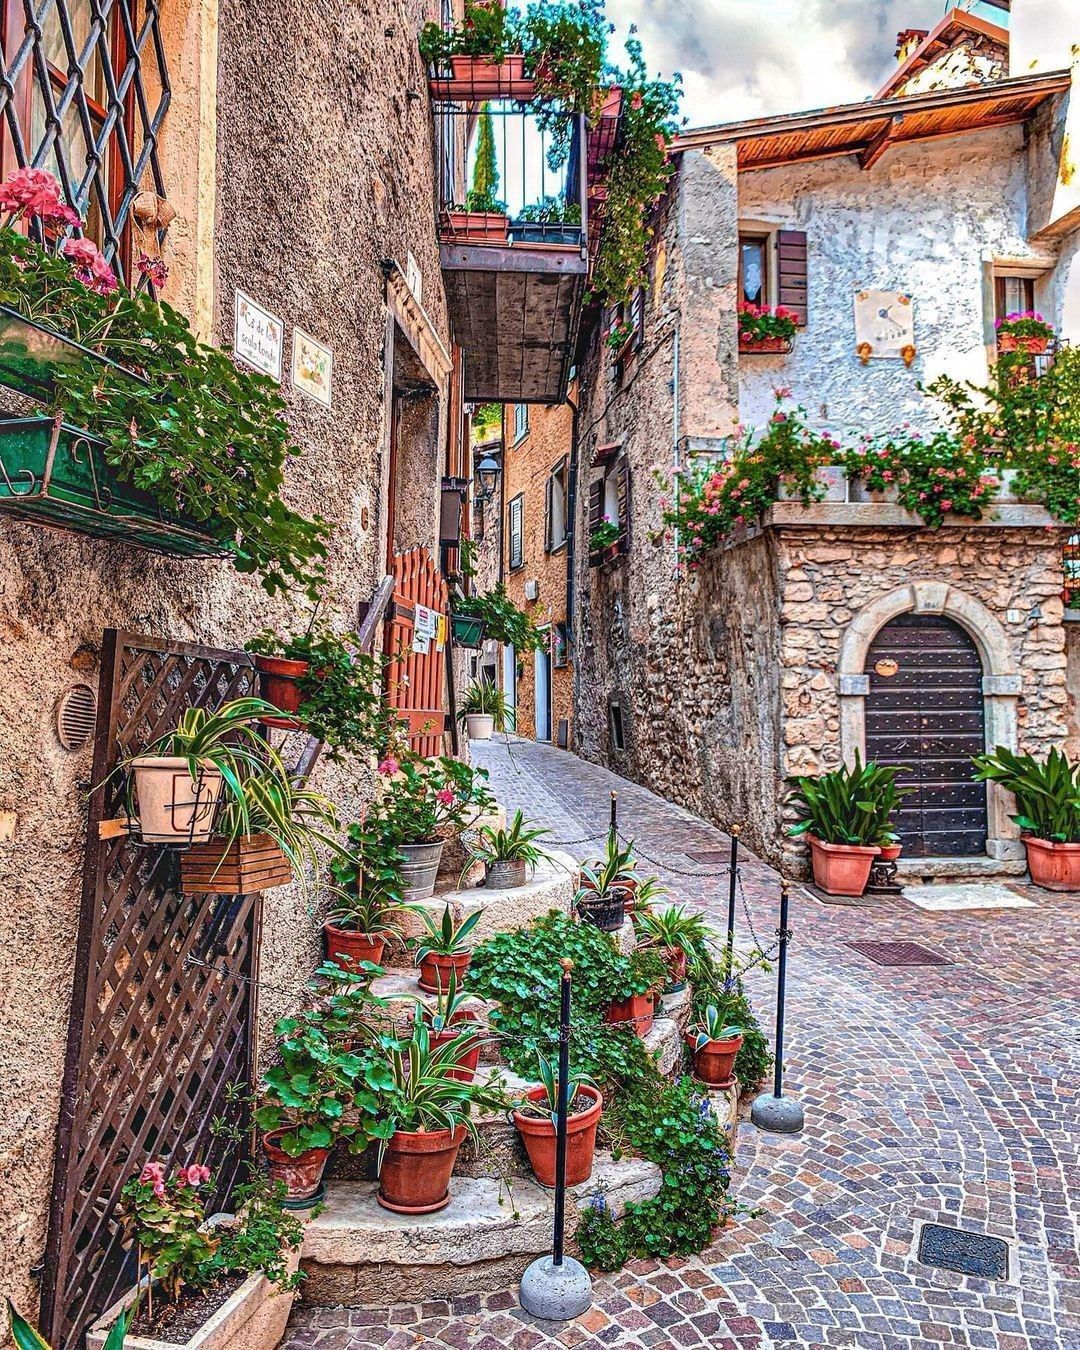 @ someone you'd Italy with...